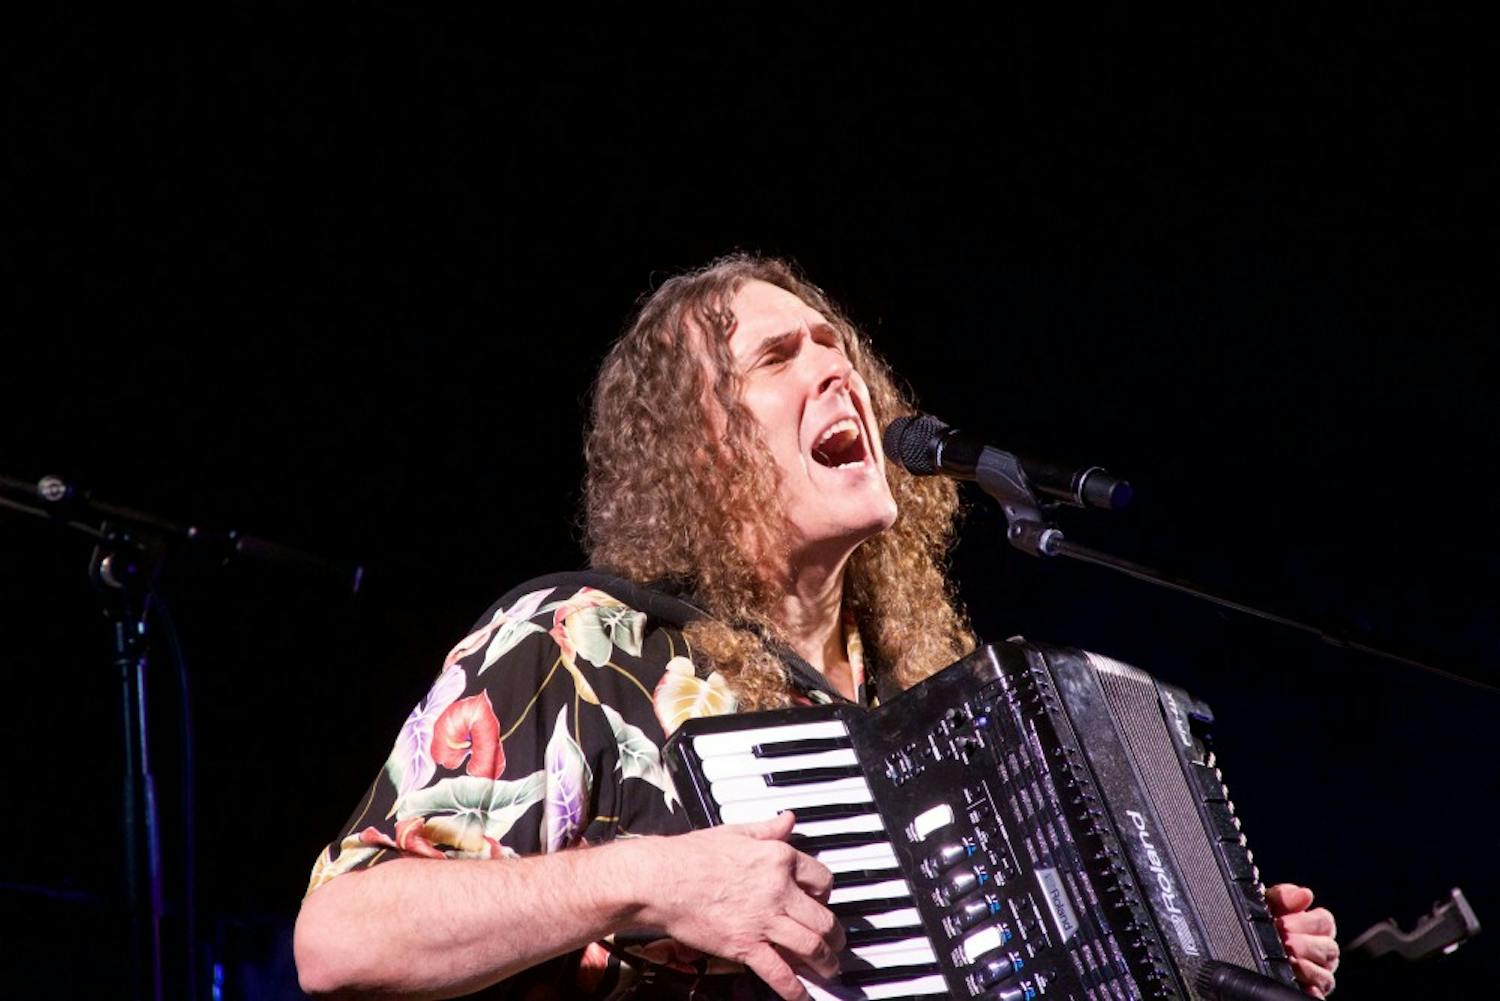 Comedian and musician Weird Al Yankovic took to the CFA Tuesday night to play a string of original tracks and a medley of his most popular parodies.